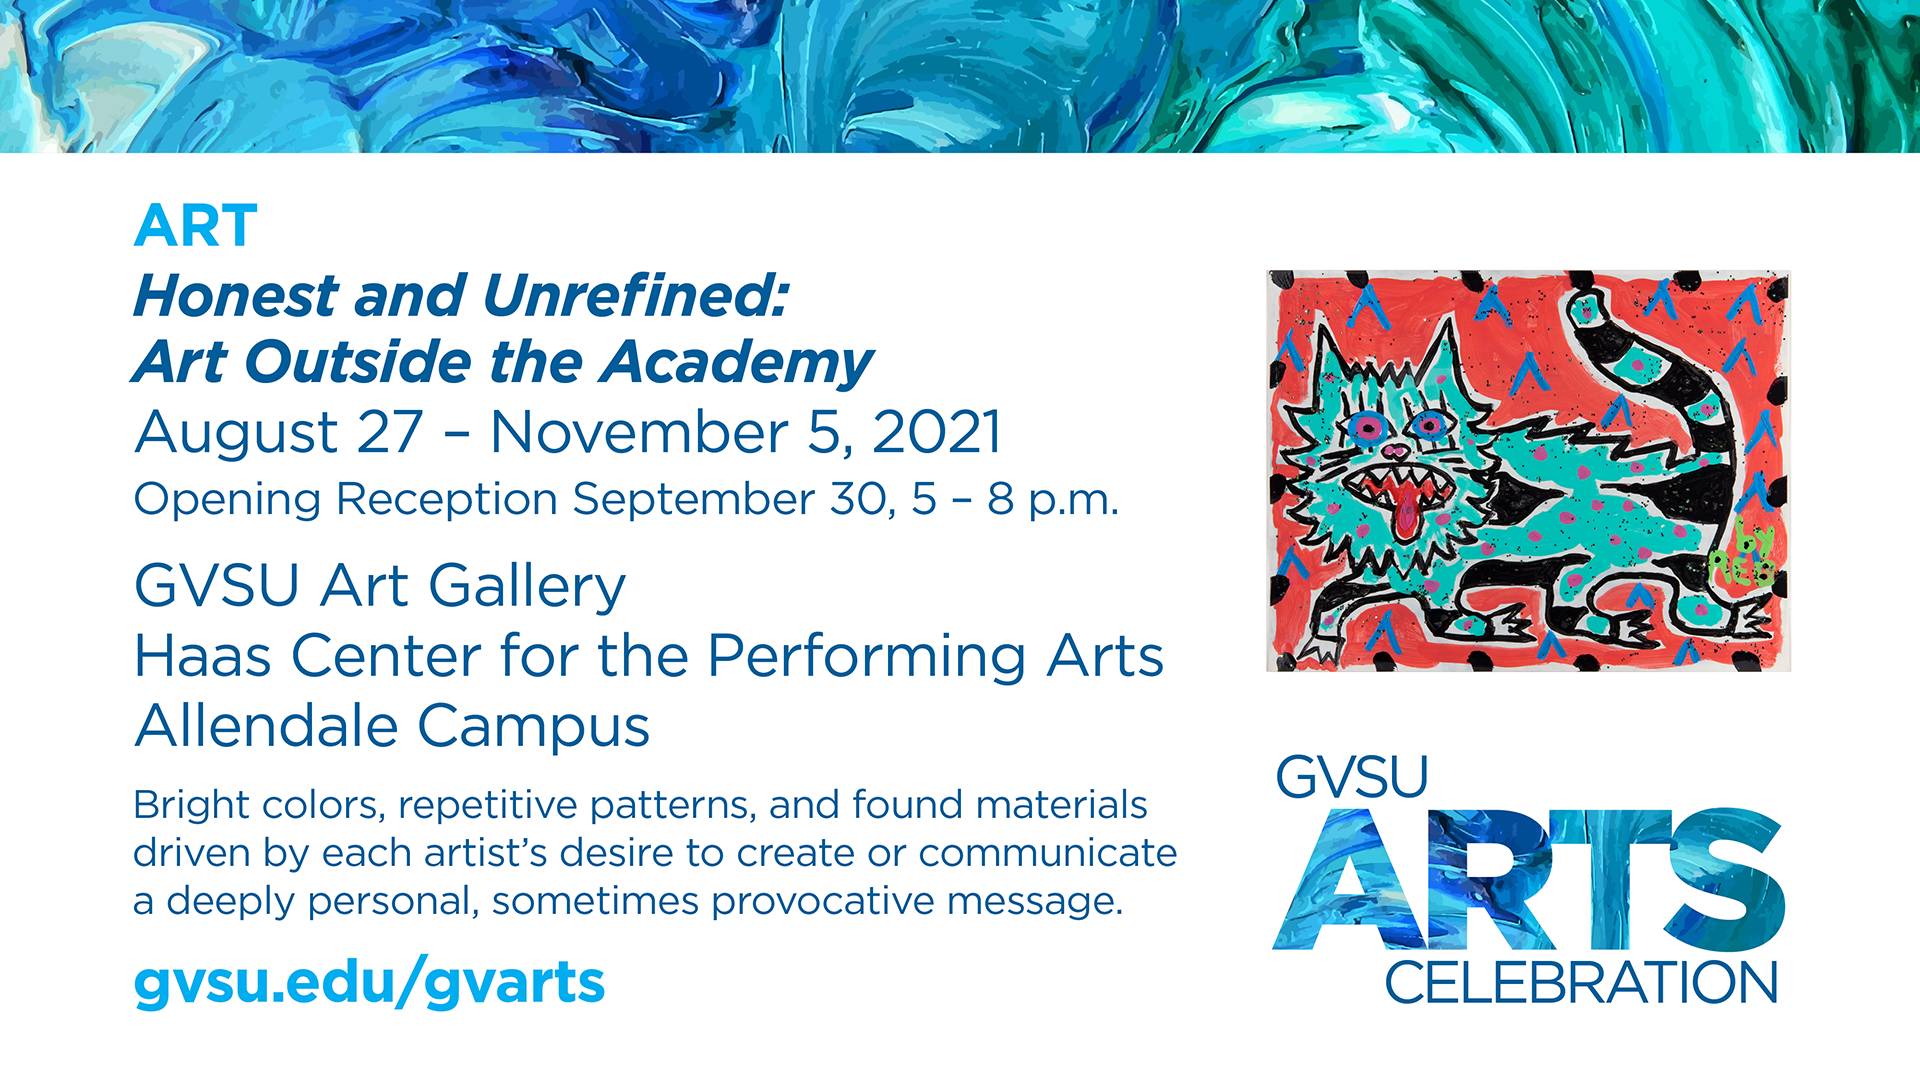 Ad for "Honest and Unrefined: Art Outside the Academy"